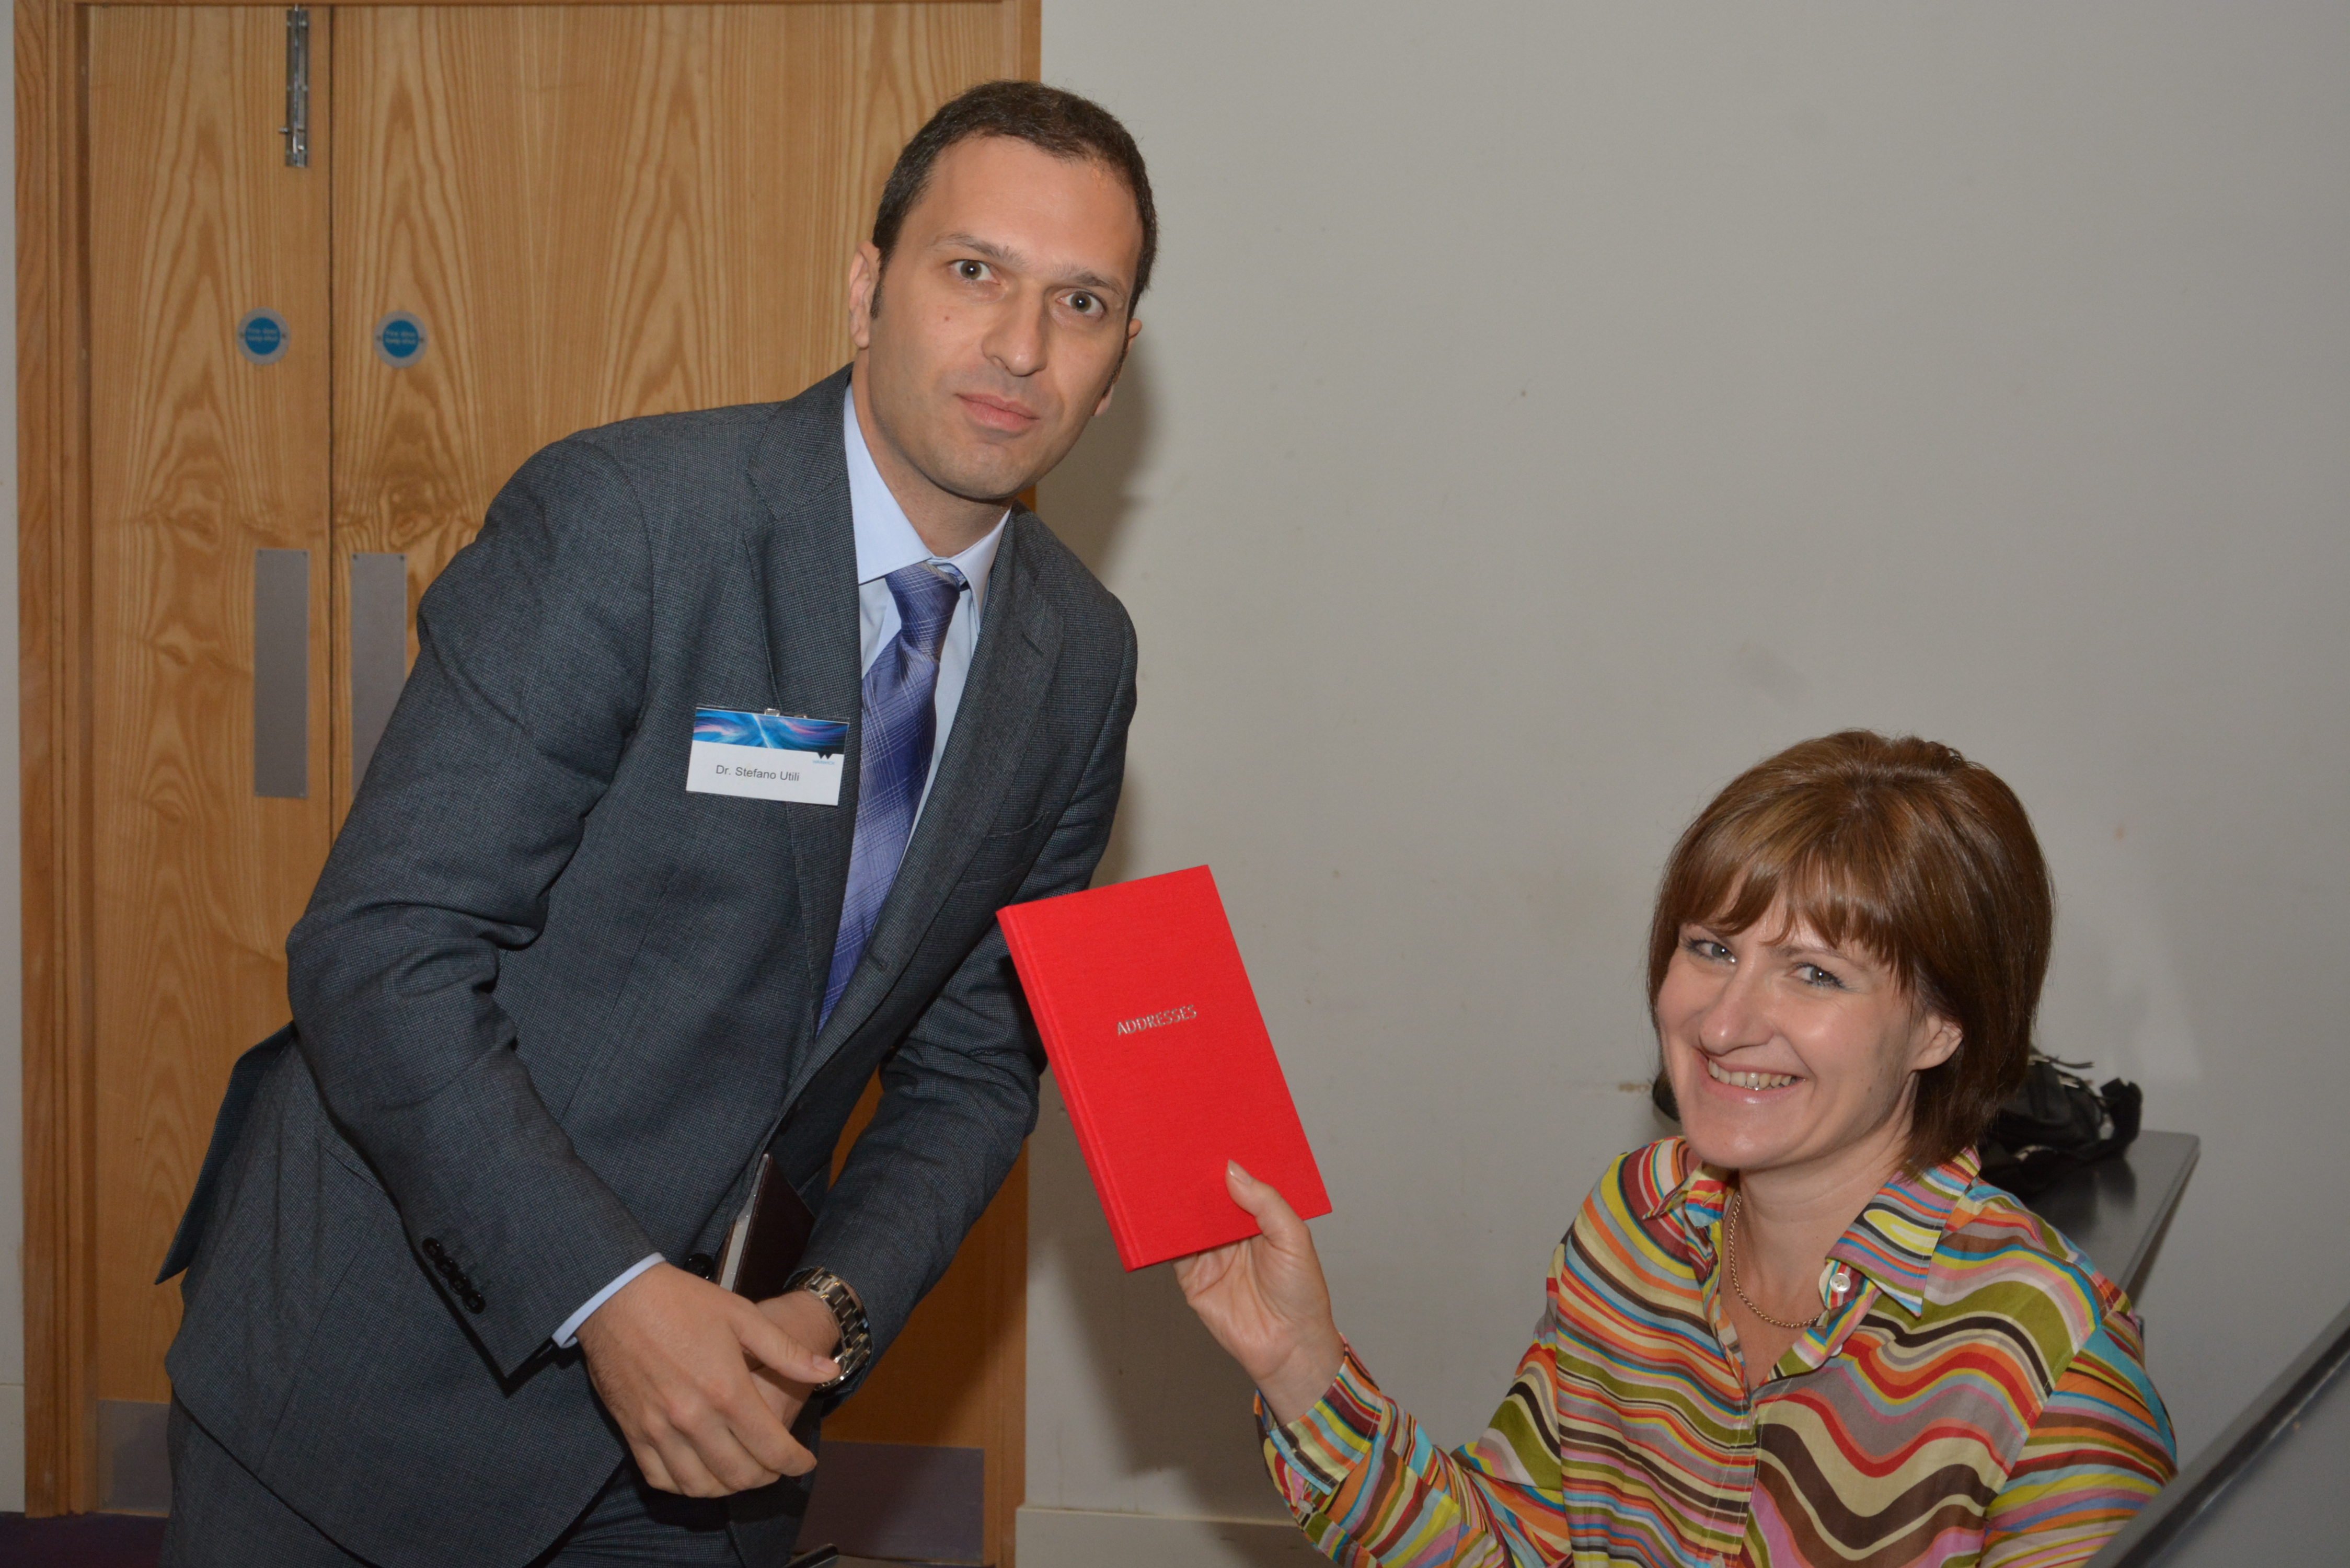 Prof. Stephanie Glendinning receiving a gift for her participation from Dr Stefano Utili